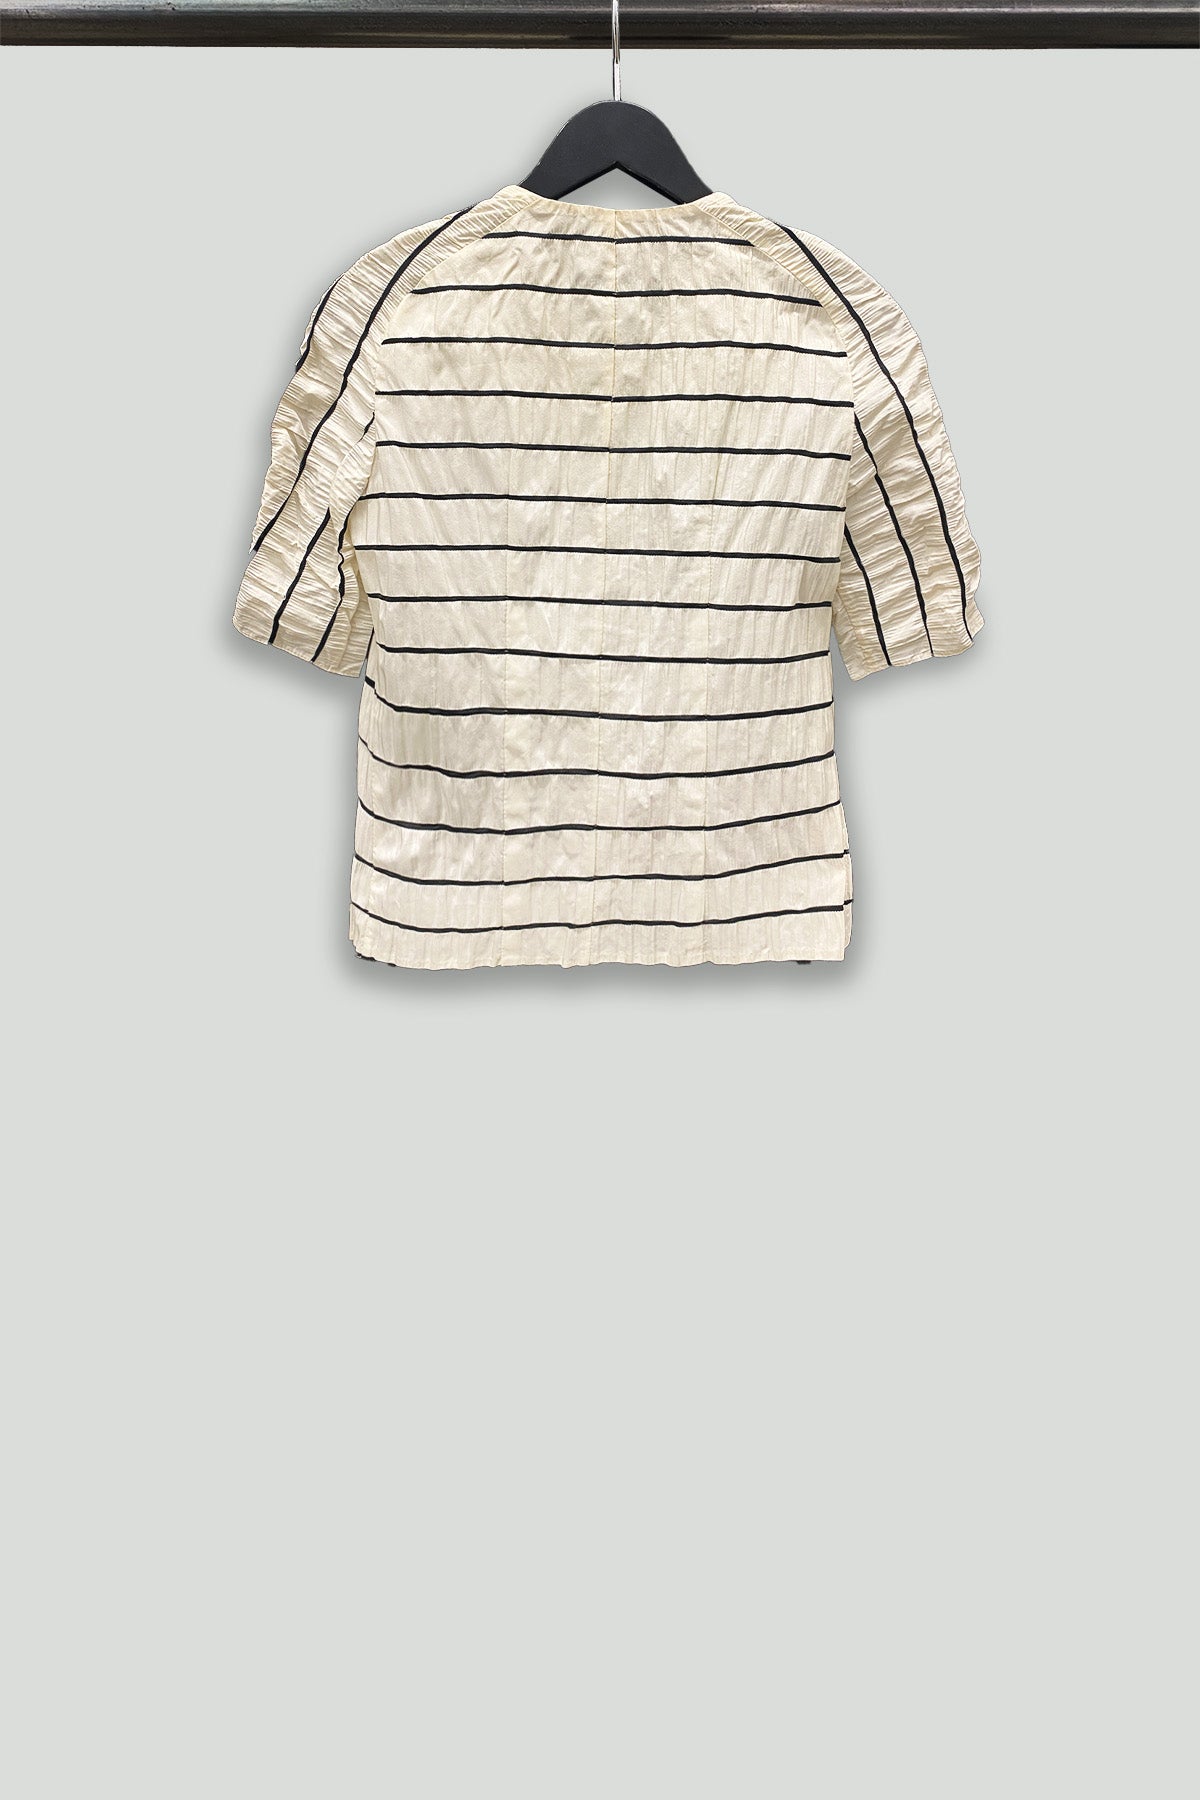 Cream and Black Striped Crinkle Cotton Short Sleeve Shirt